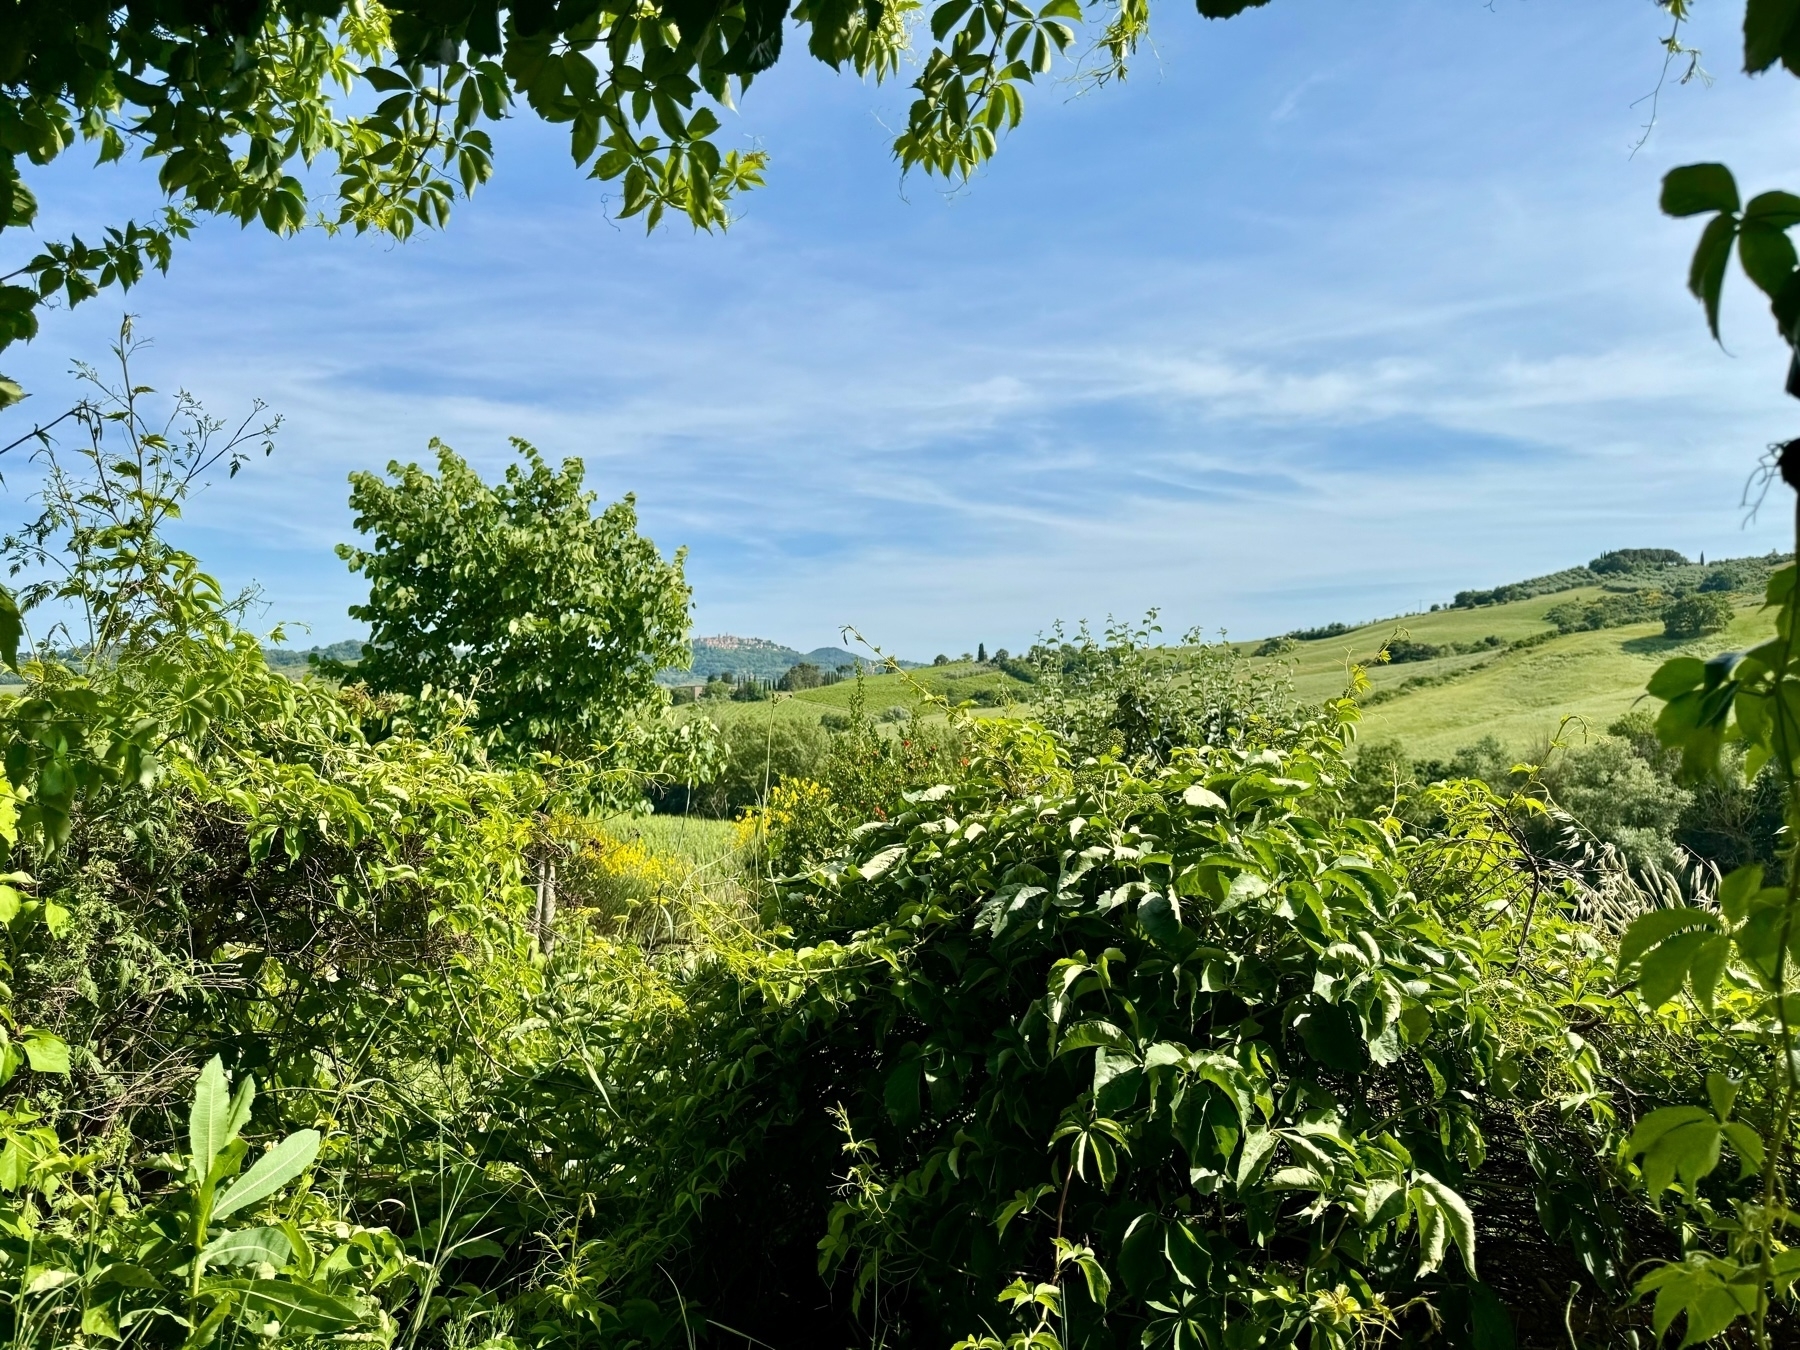 A lush, green landscape featuring dense foliage in the foreground, with various plants and trees. The background reveals rolling hills under a clear blue sky with light clouds. A distant hilltop village or town is faintly visible. 